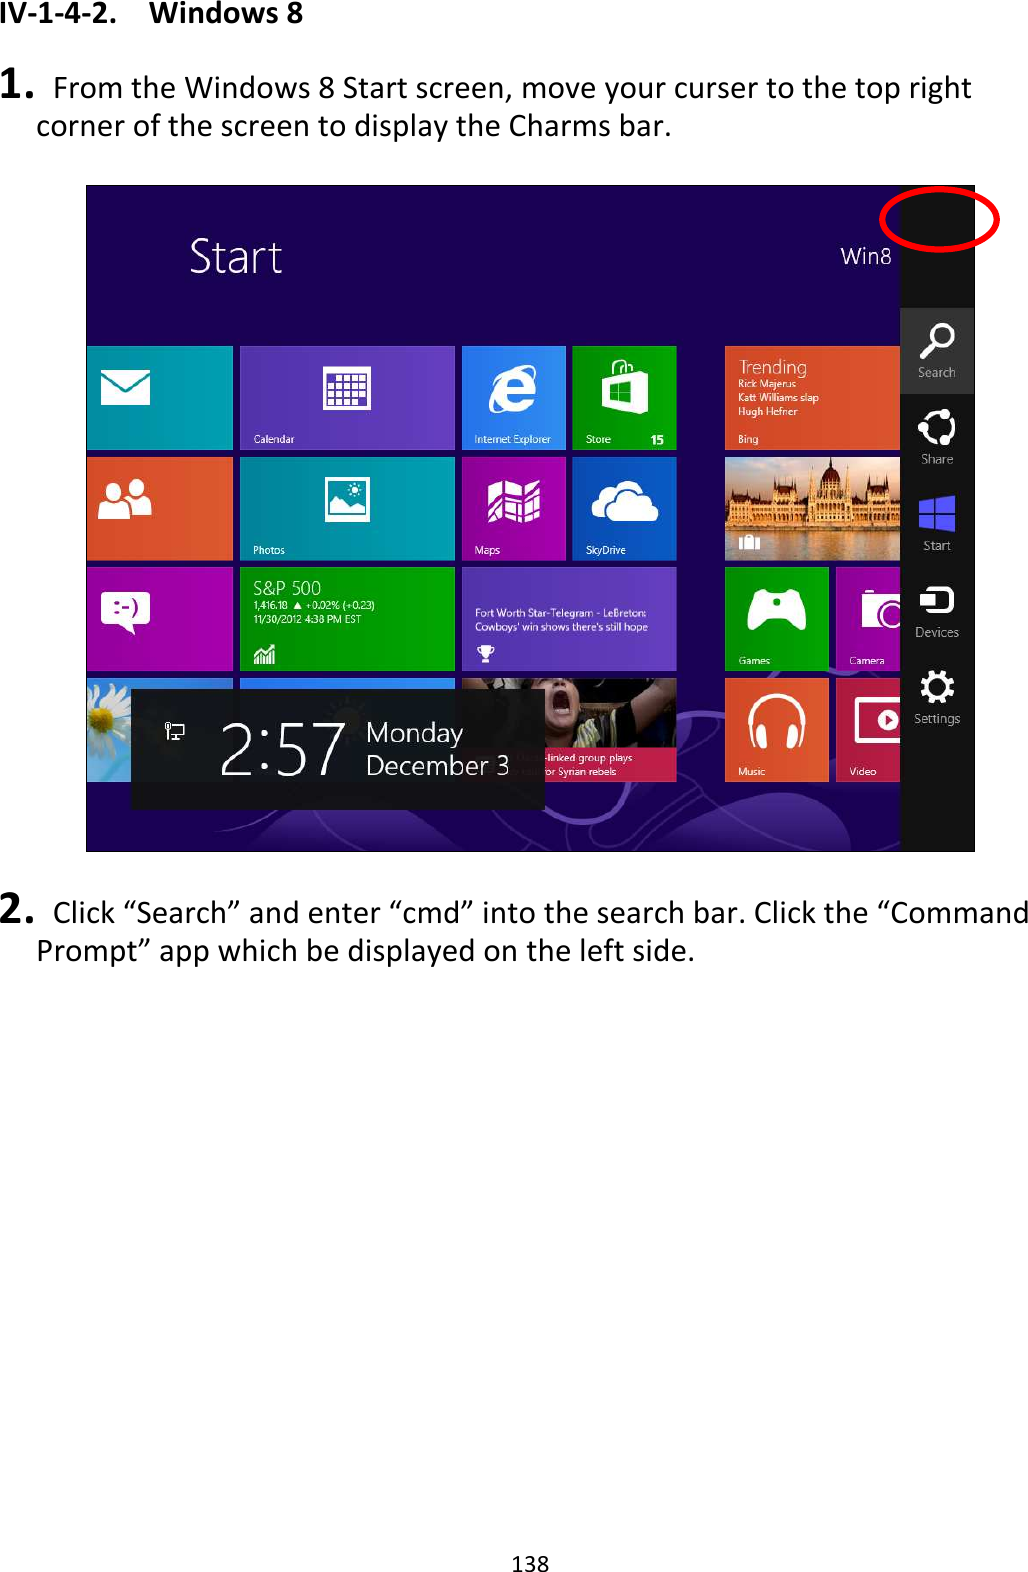 138 IV-1-4-2.  Windows 8  1.   From the Windows 8 Start screen, move your curser to the top right corner of the screen to display the Charms bar.    2.   Click “Search” and enter “cmd” into the search bar. Click the “Command Prompt” app which be displayed on the left side.  